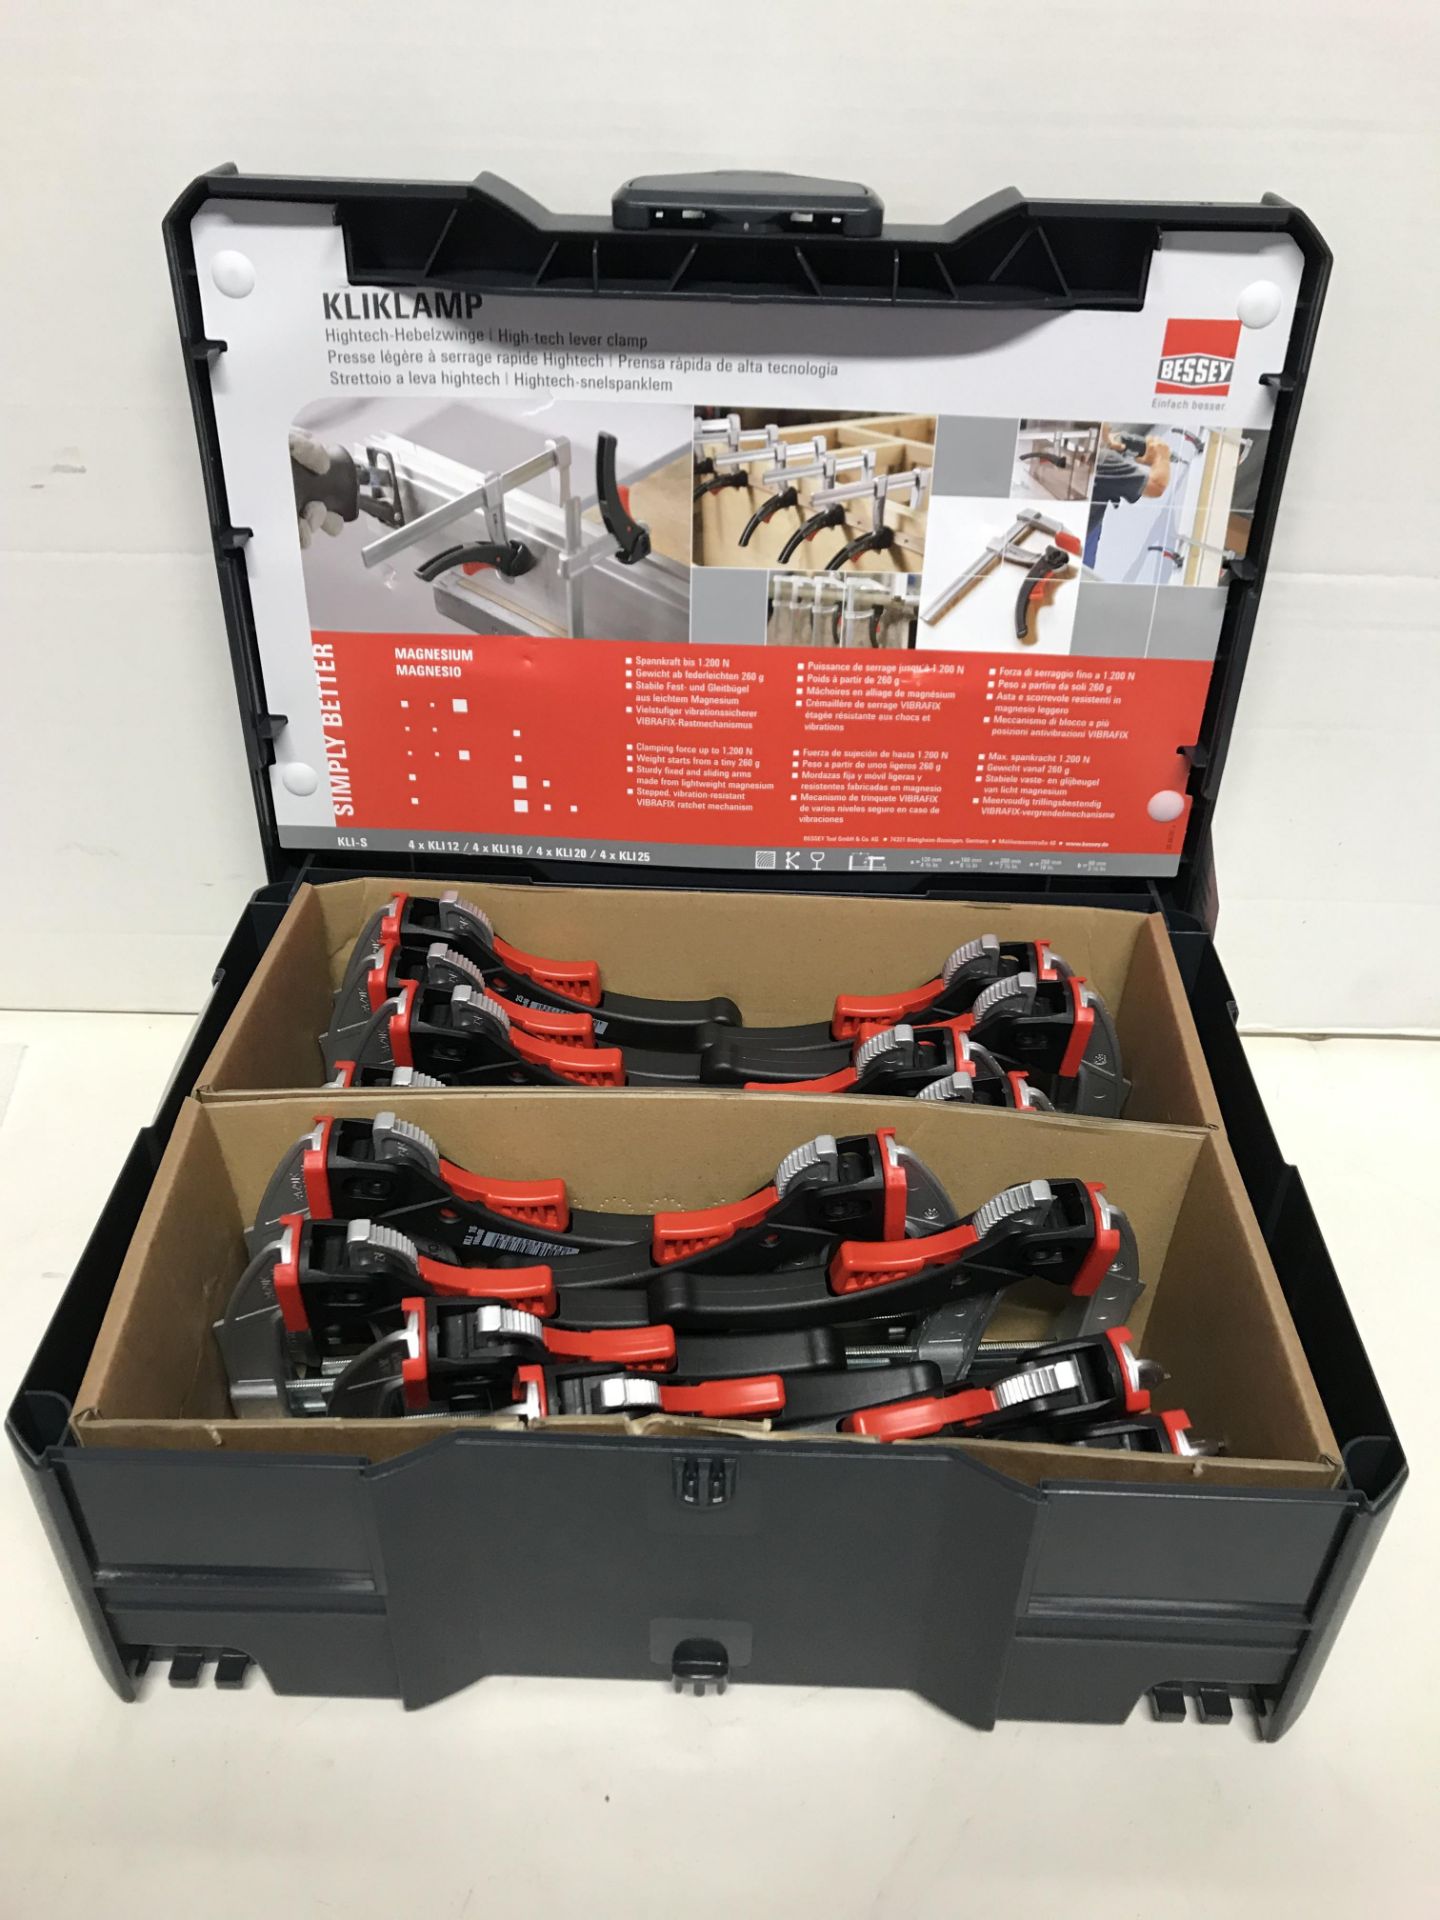 1 x Bessey KLI-S Kliklamp Systainer Set with 16 Clamps, Silver, teilig | EAN: 4008158027296 | RRP £3 - Image 3 of 4